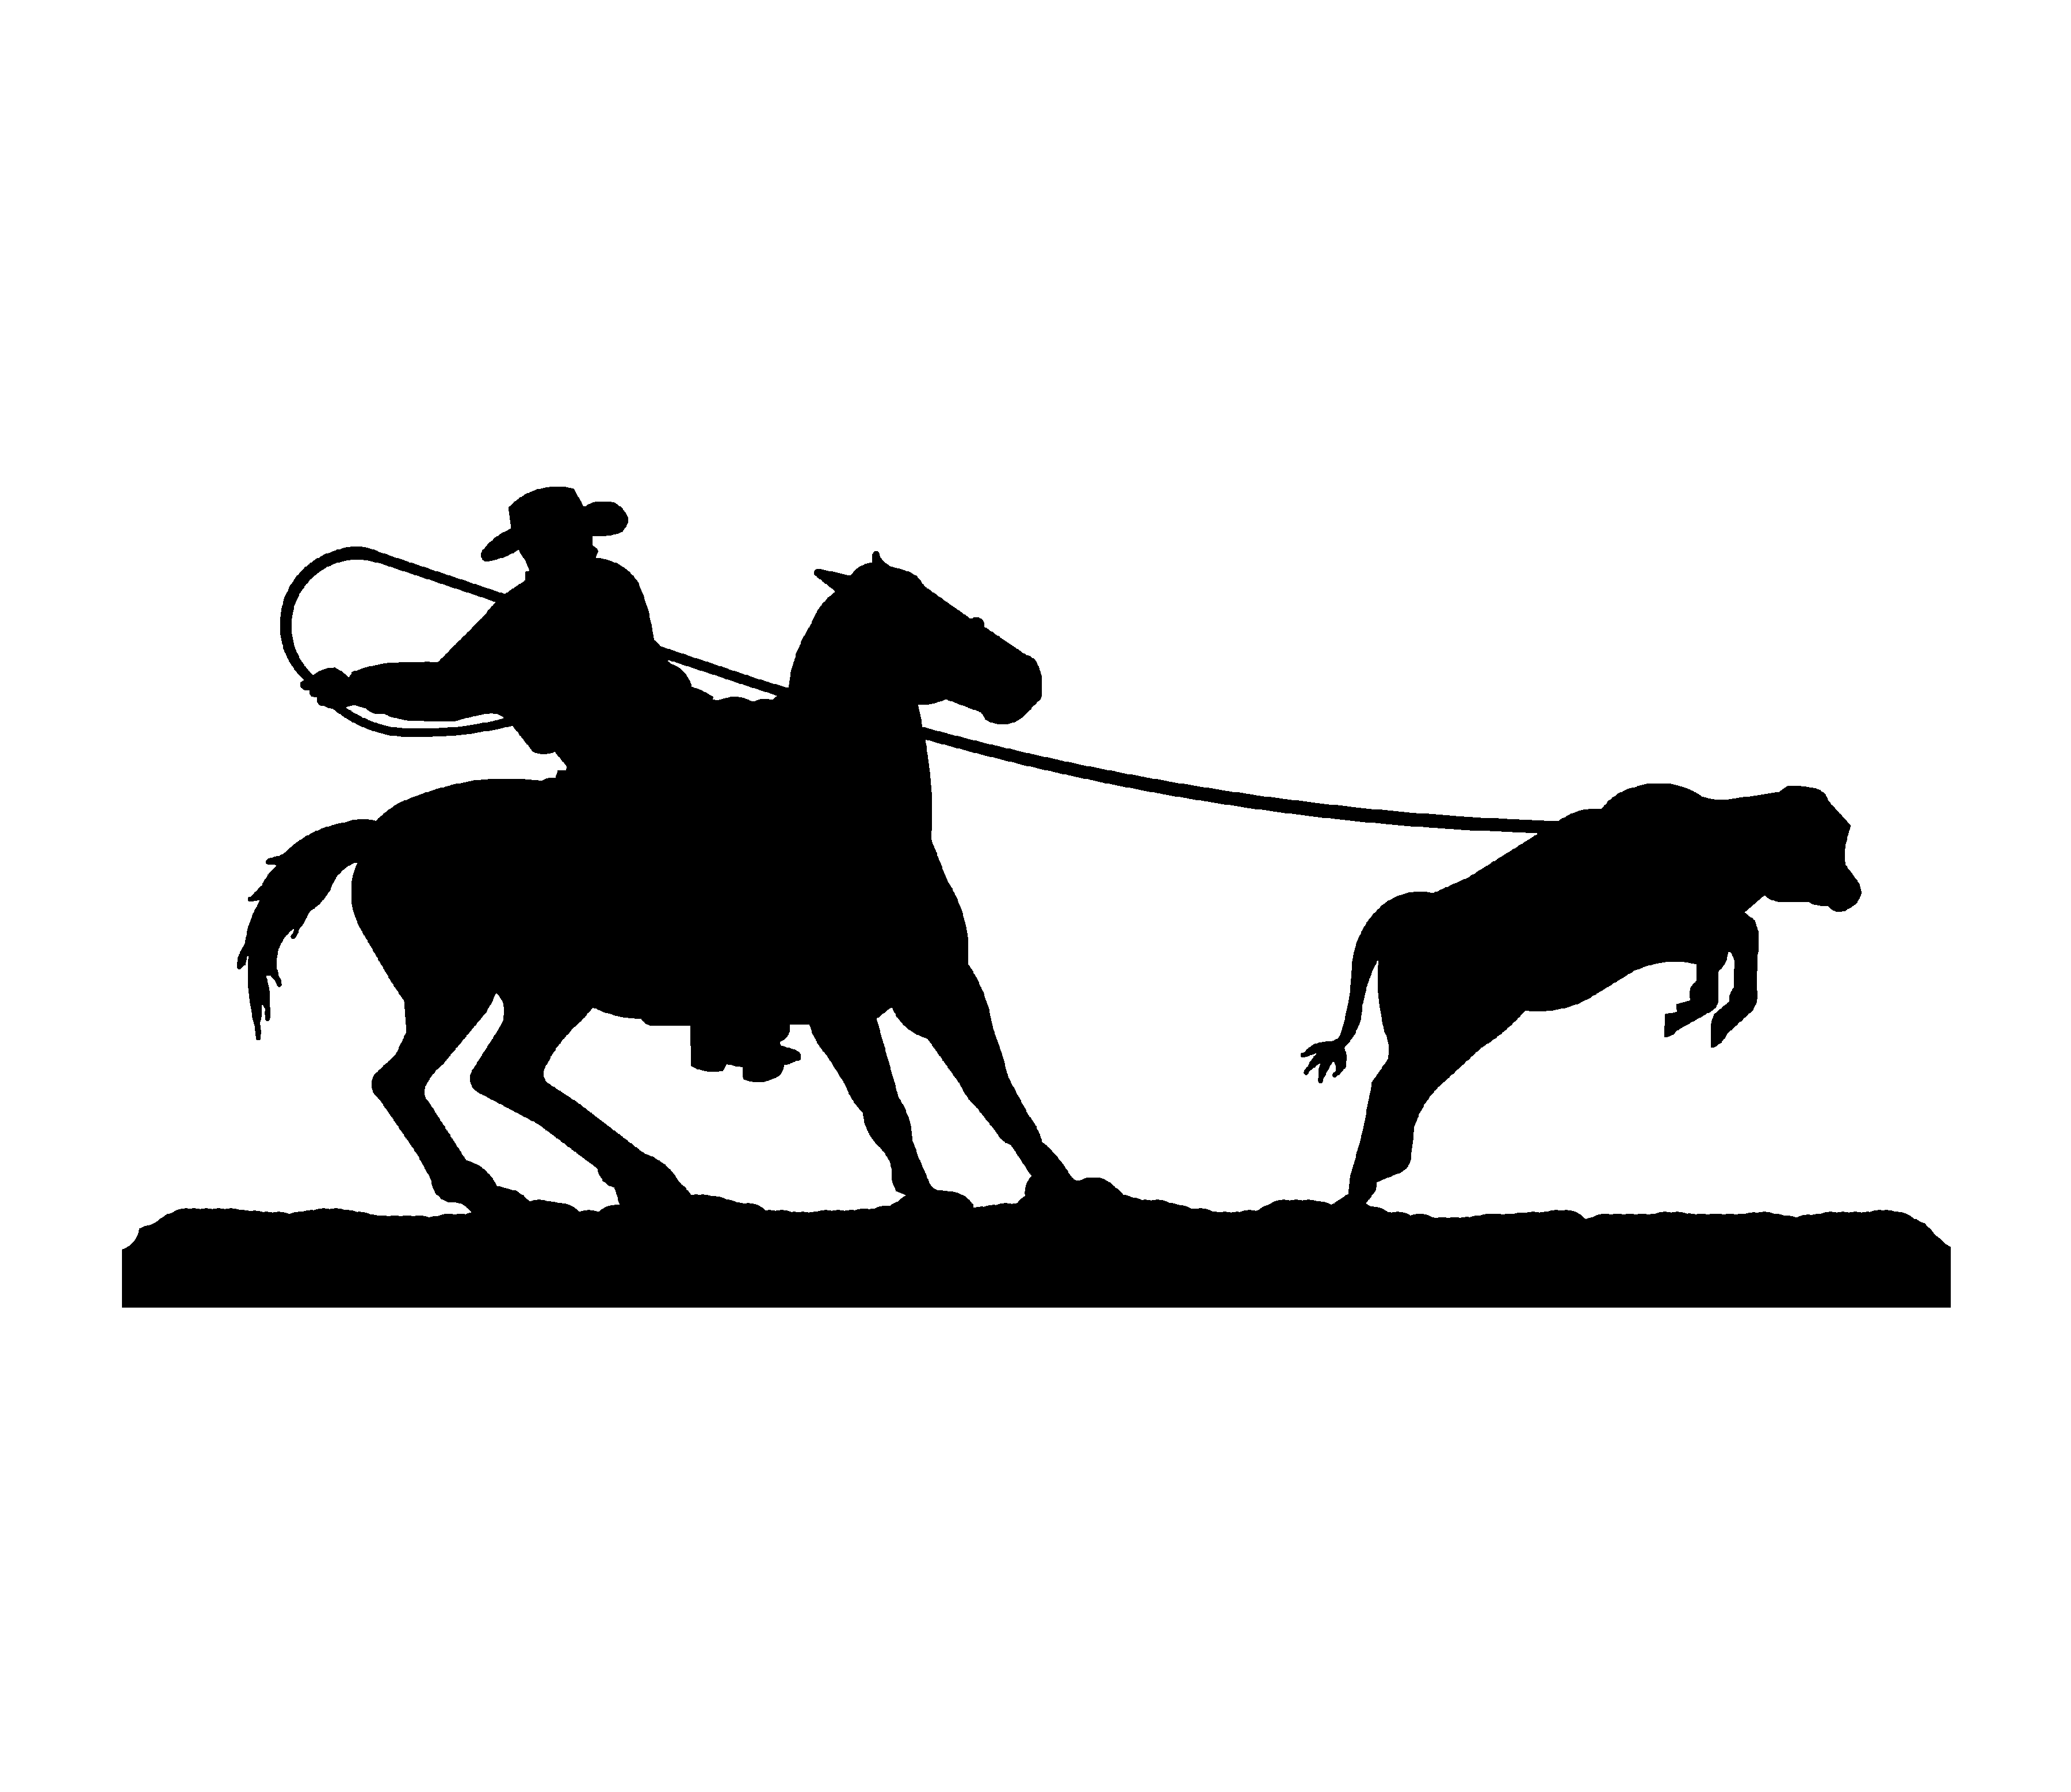 Cowboy Roping Silhouette Clipart. 